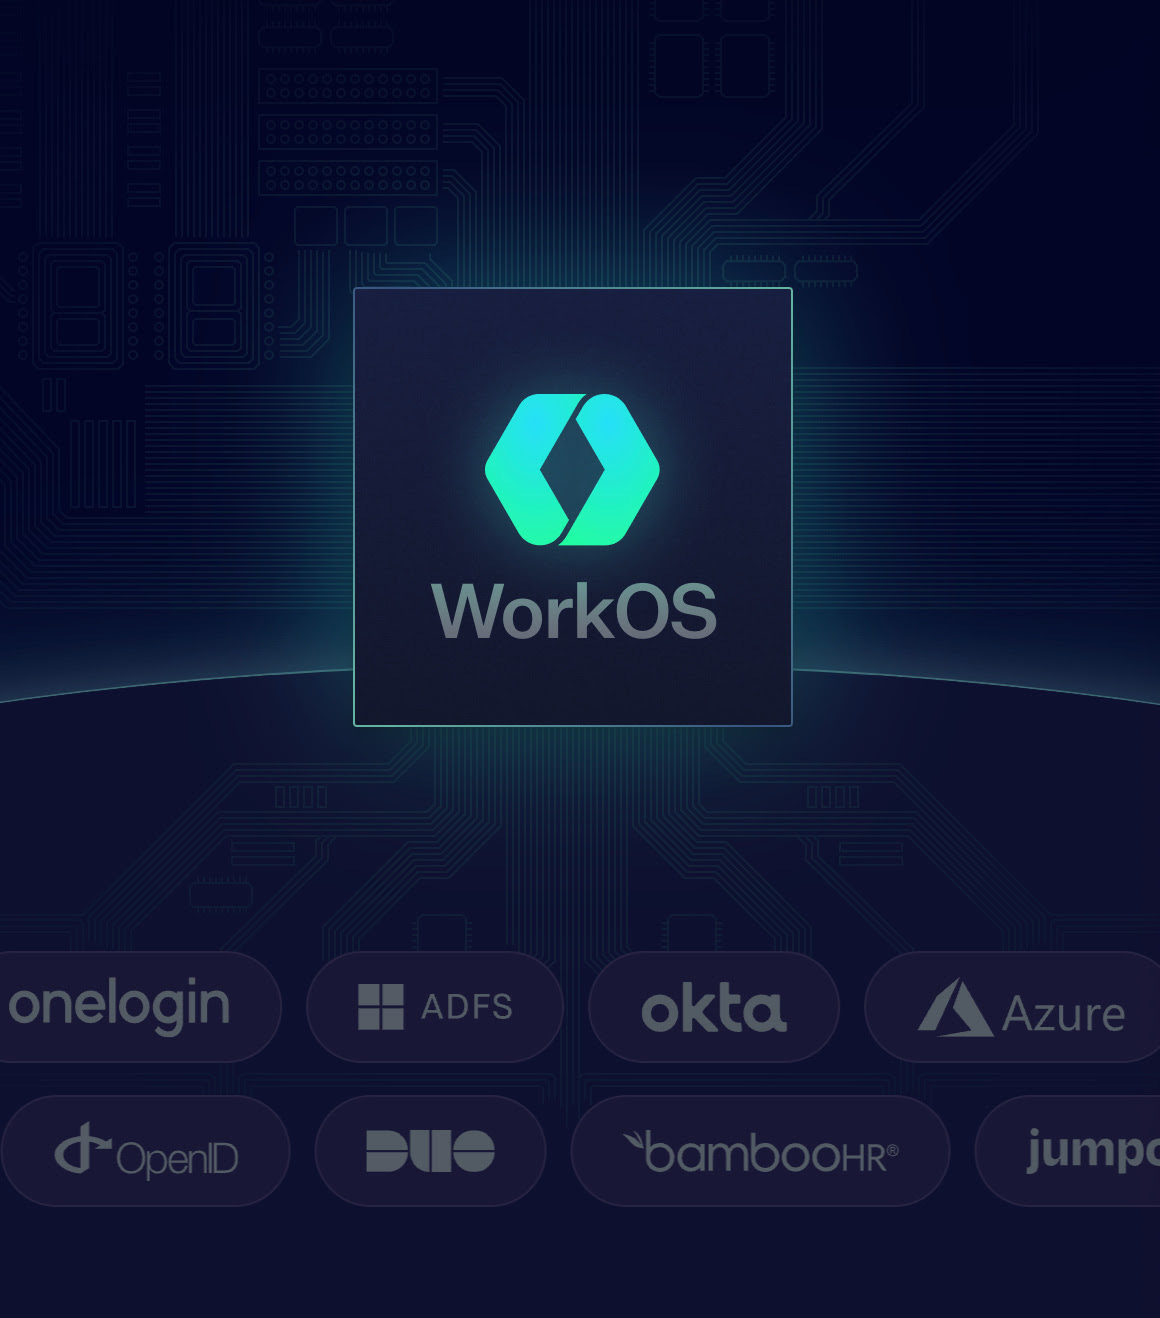 Cross-post: Why You Should Join WorkOS